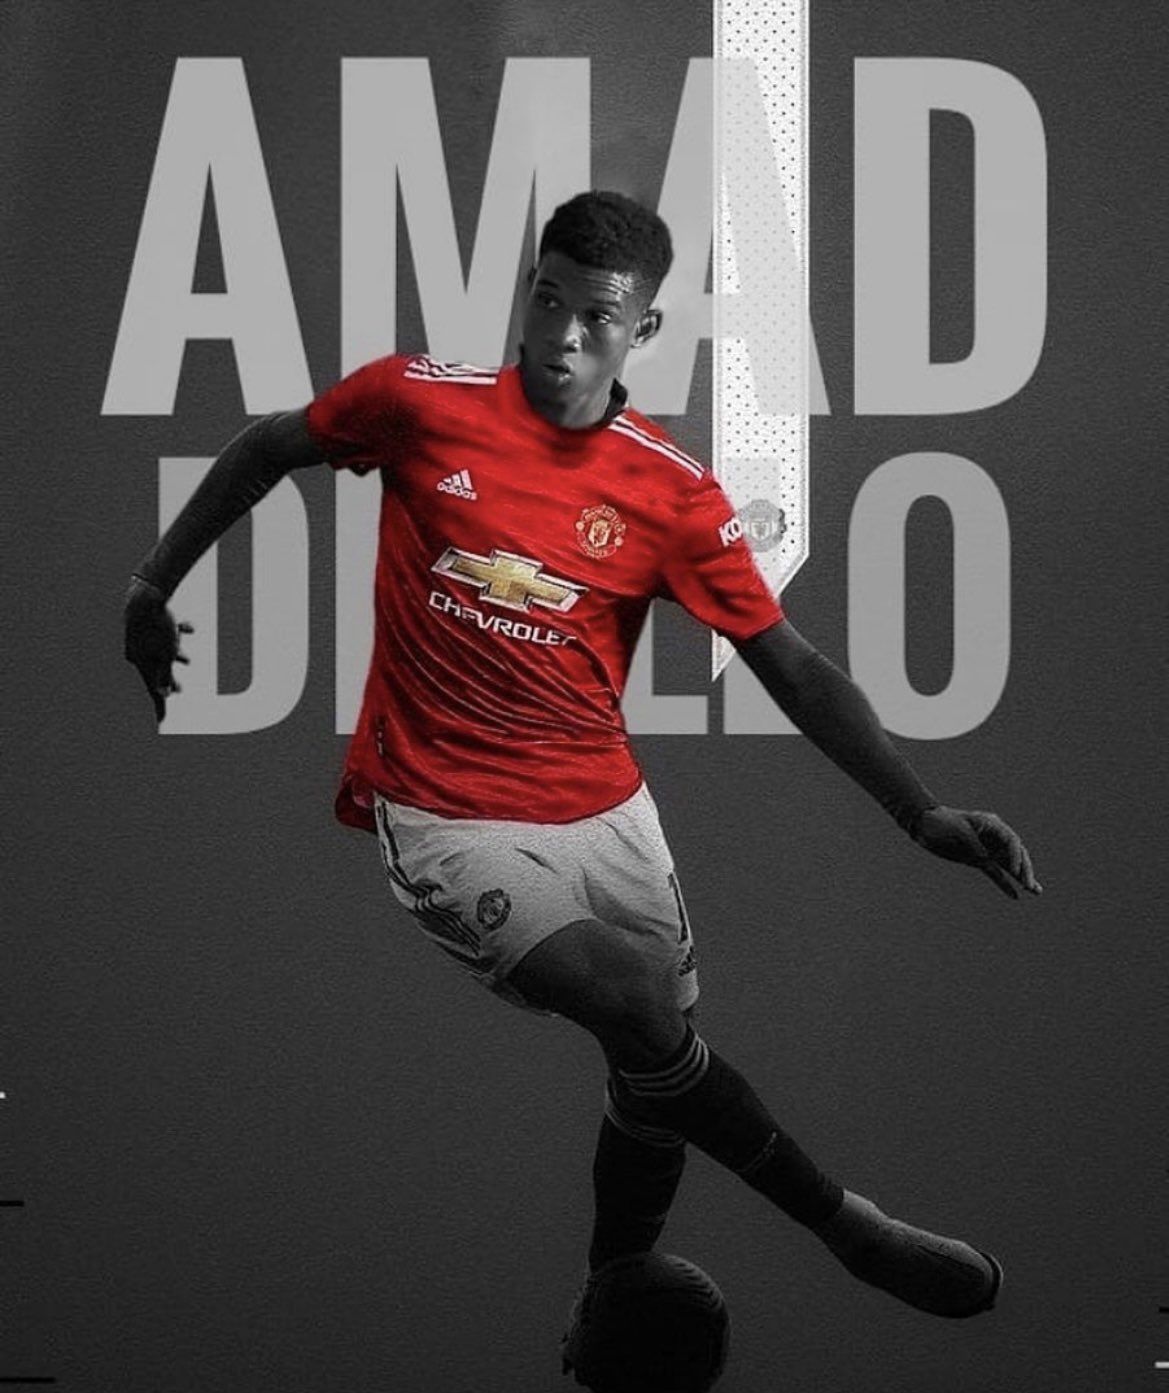 Amad Diallo move to Manchester United all but complete